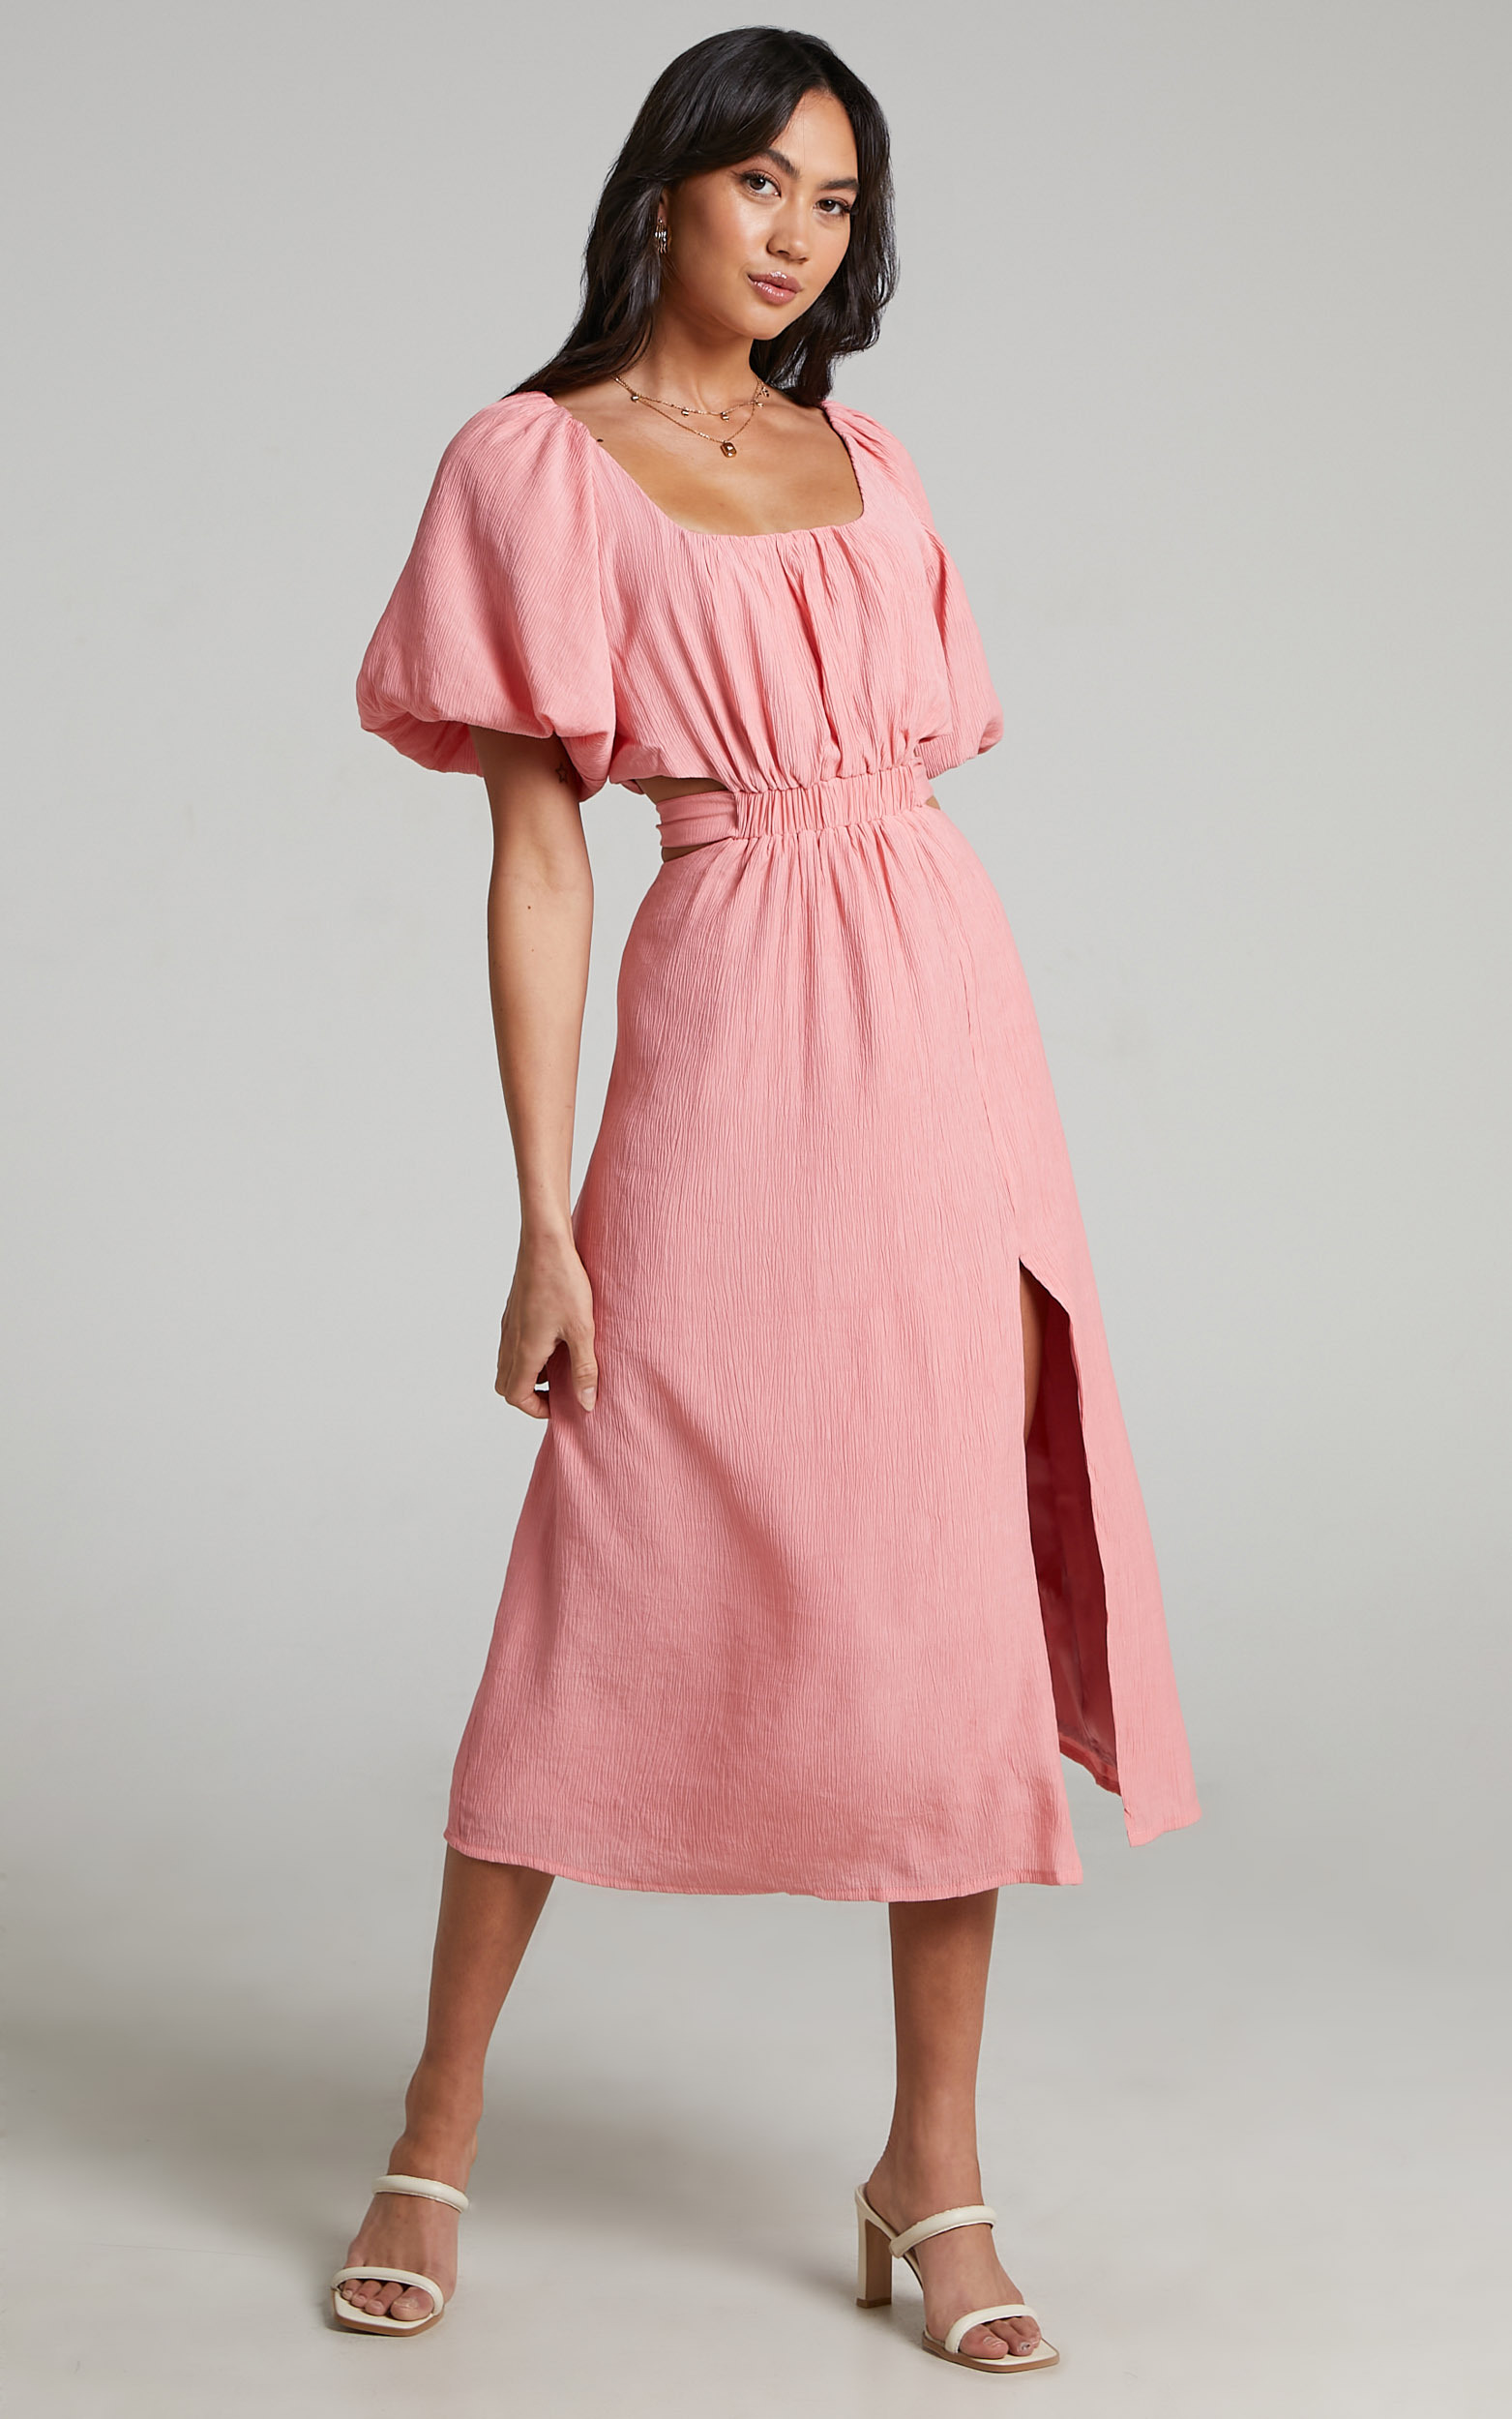 Pristina puff sleeve cut out midi dress in Coral - 06, PNK1, hi-res image number null